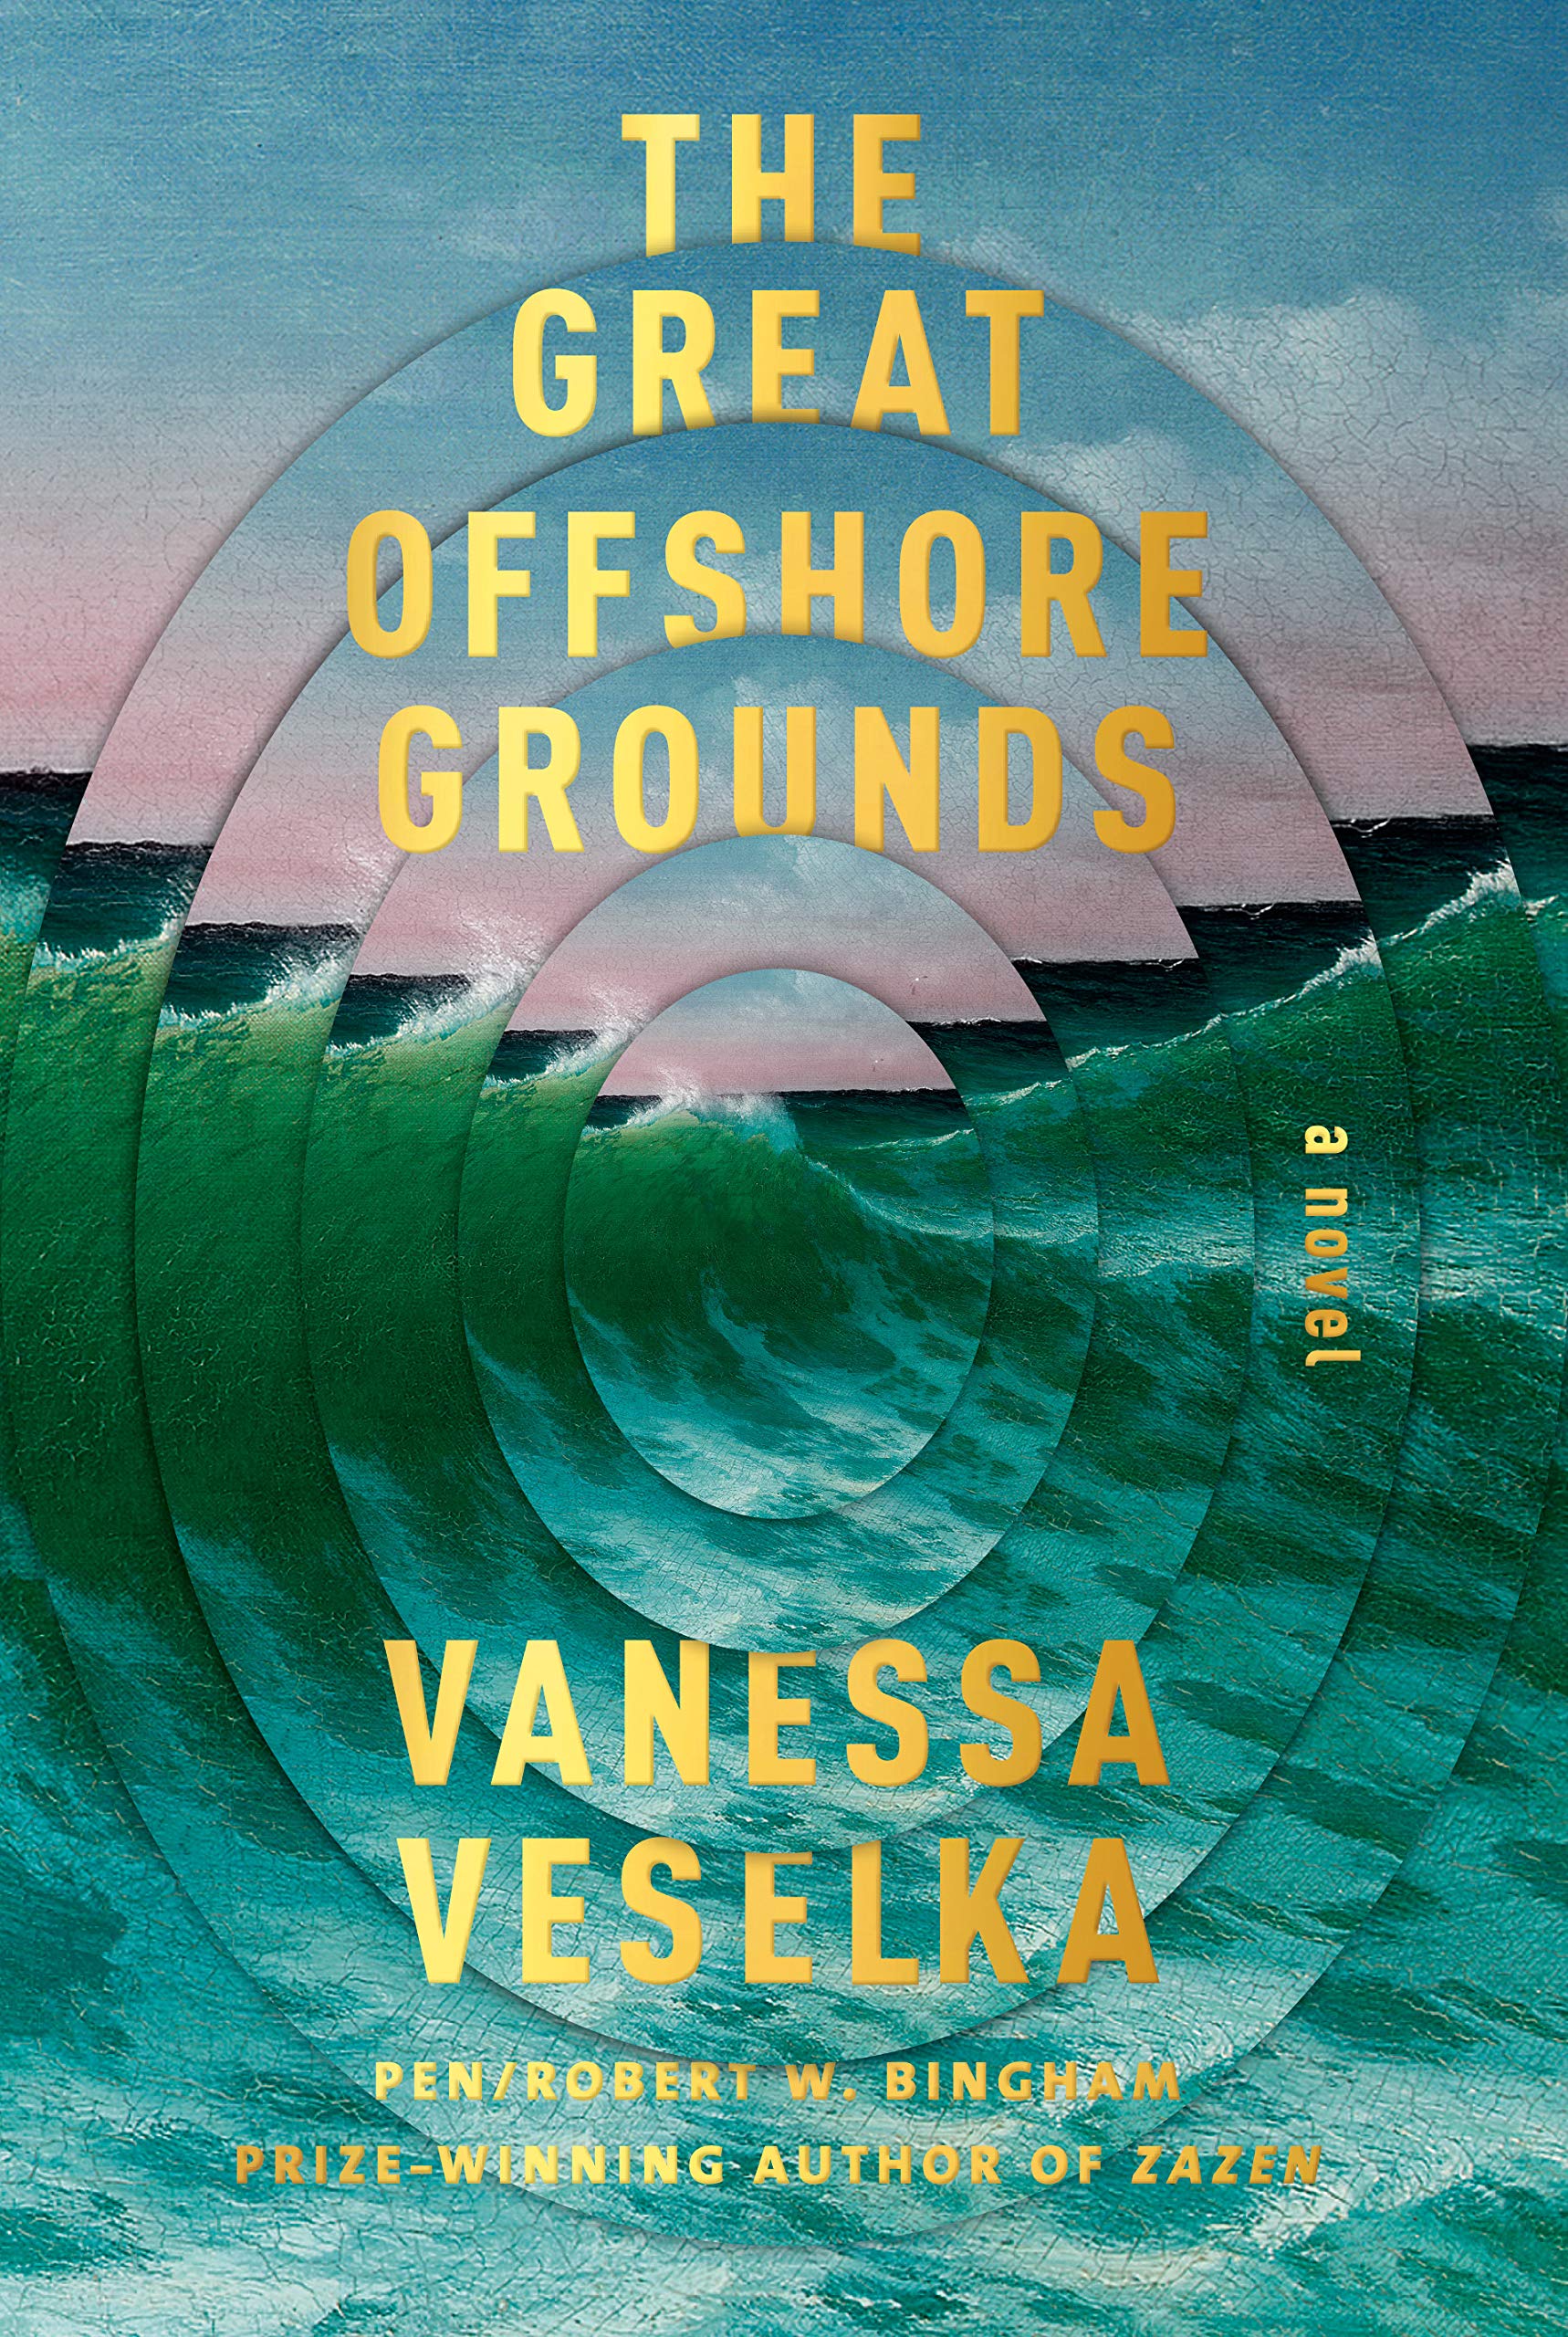 #1678: Vanessa Veselka “The Great Offshore Grounds” | The Book Show